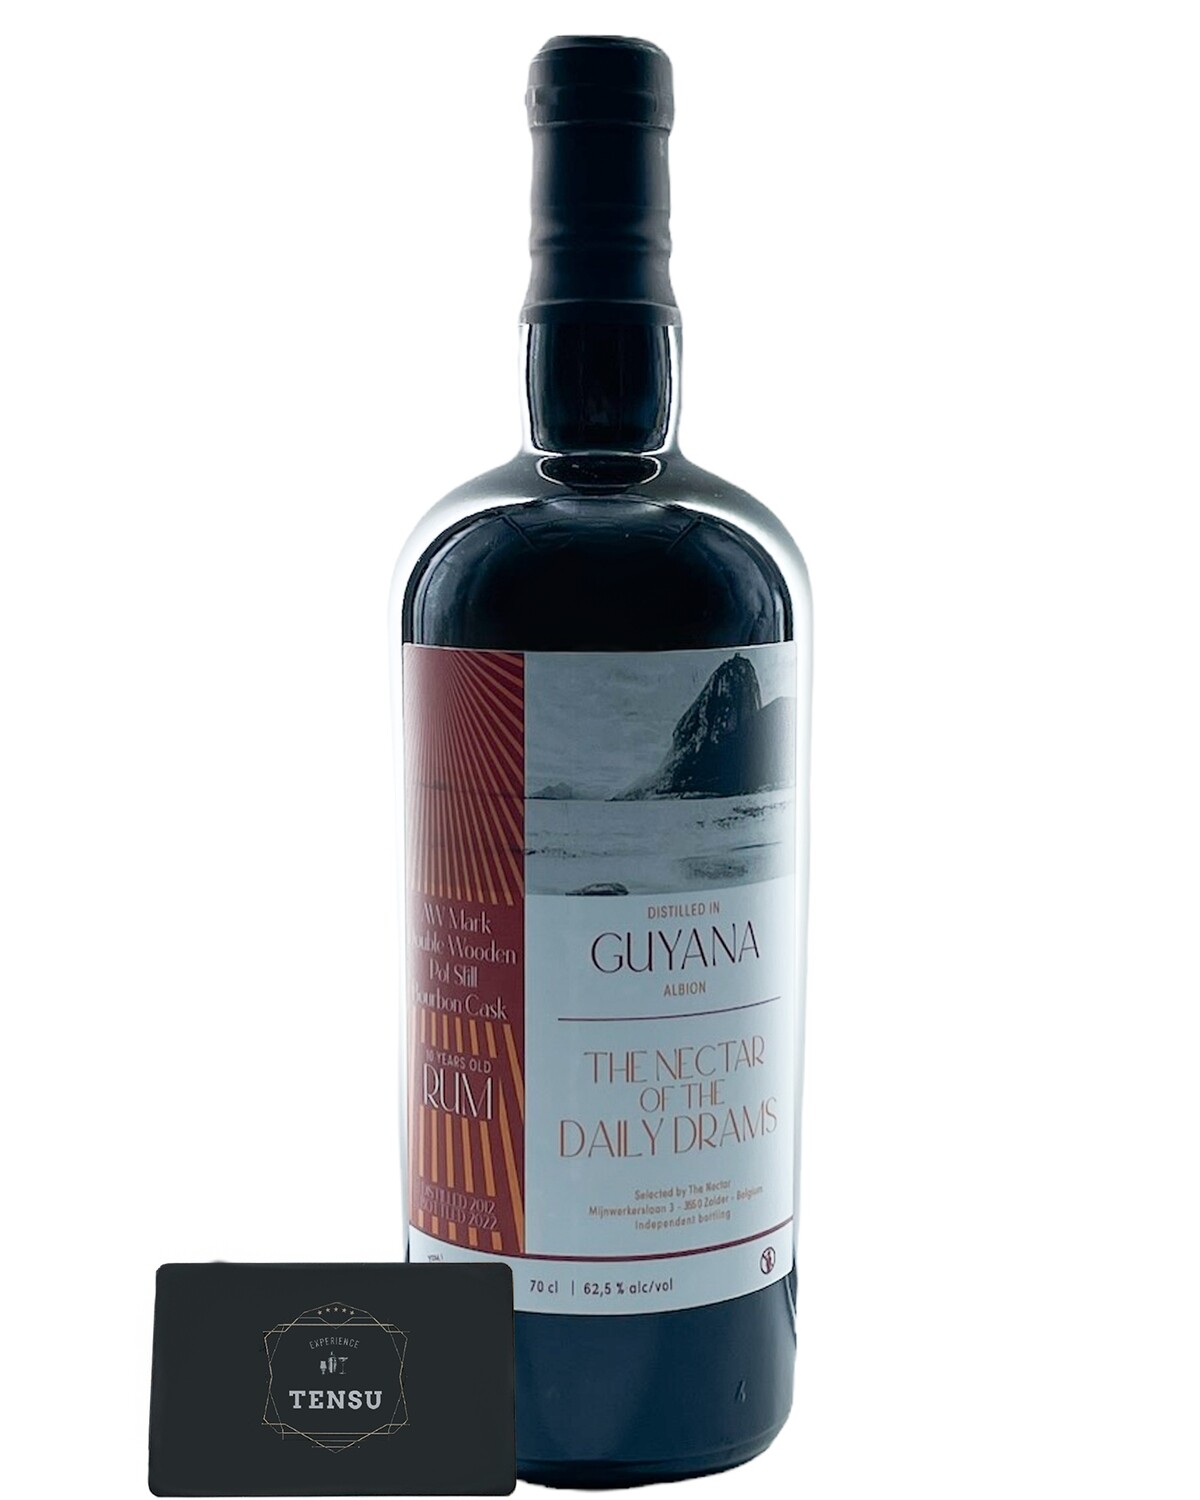 Guyana Albion AW 10Y (2012-2022) 62.5 Daily Dram "The Nectar"